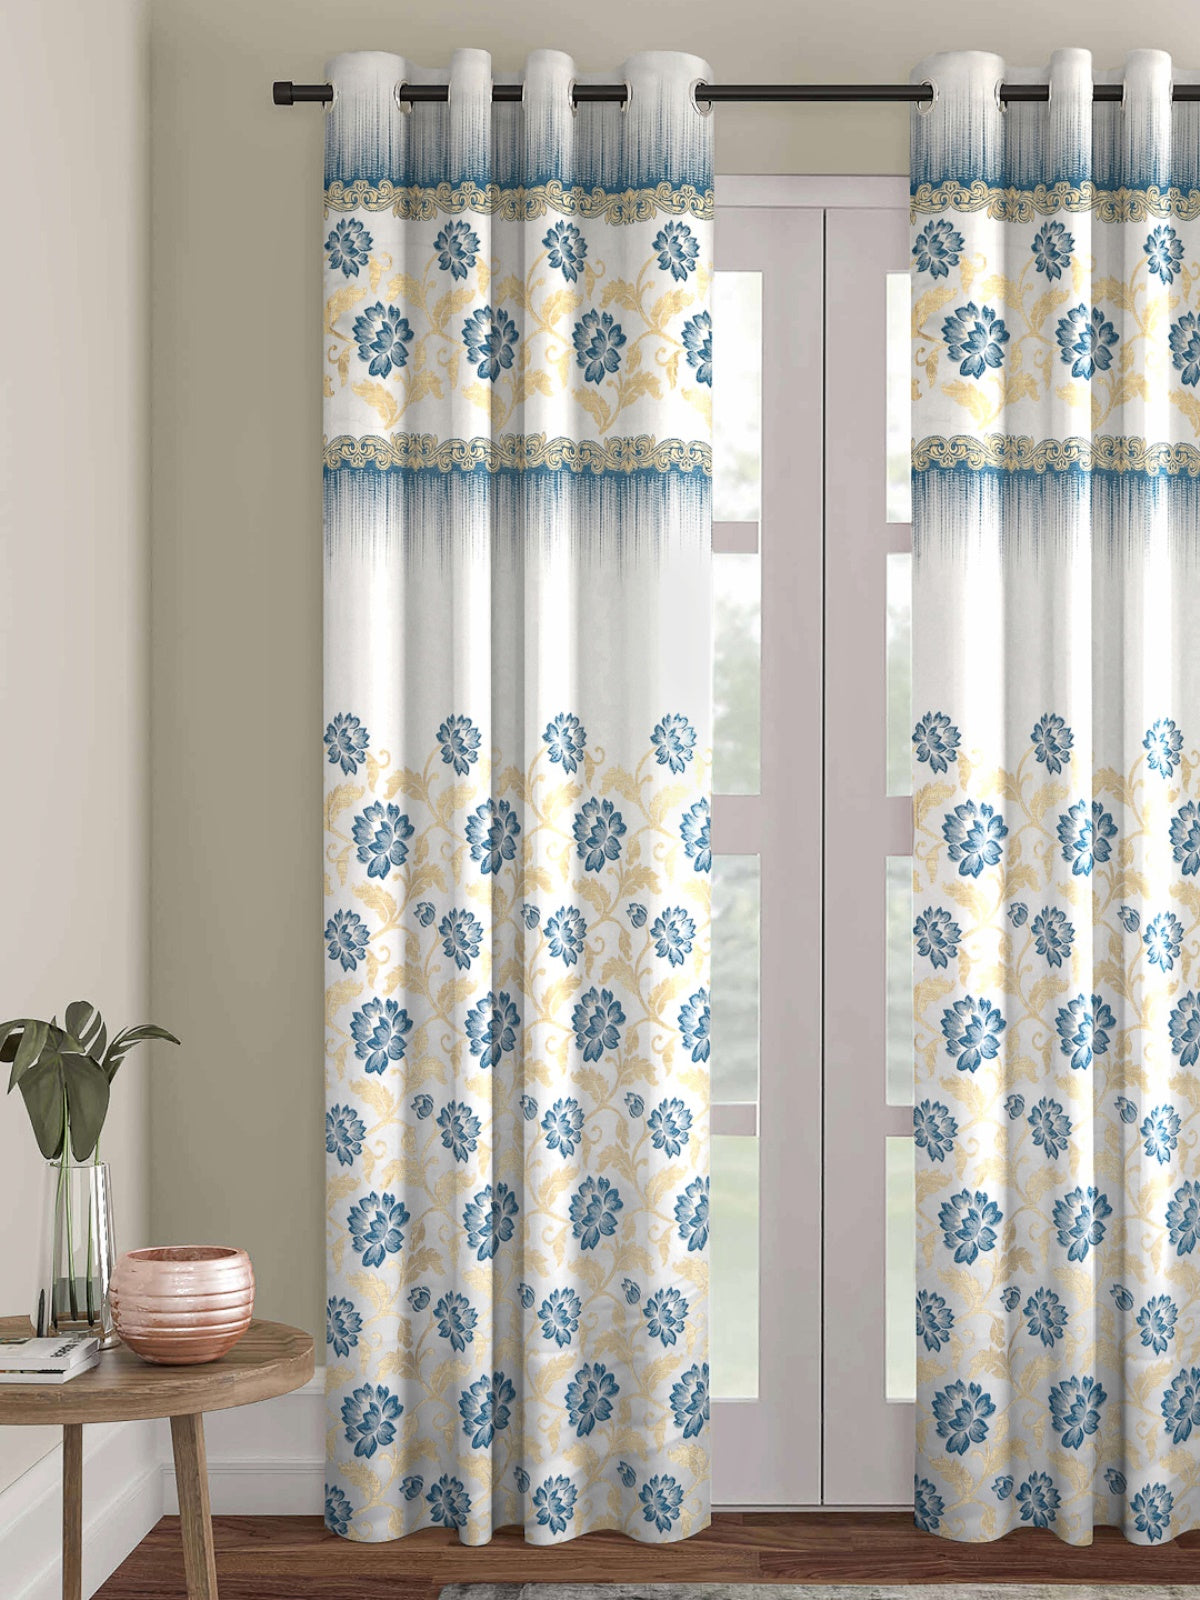 Romee Blue & White Floral Patterned Set of 1 Door Curtains